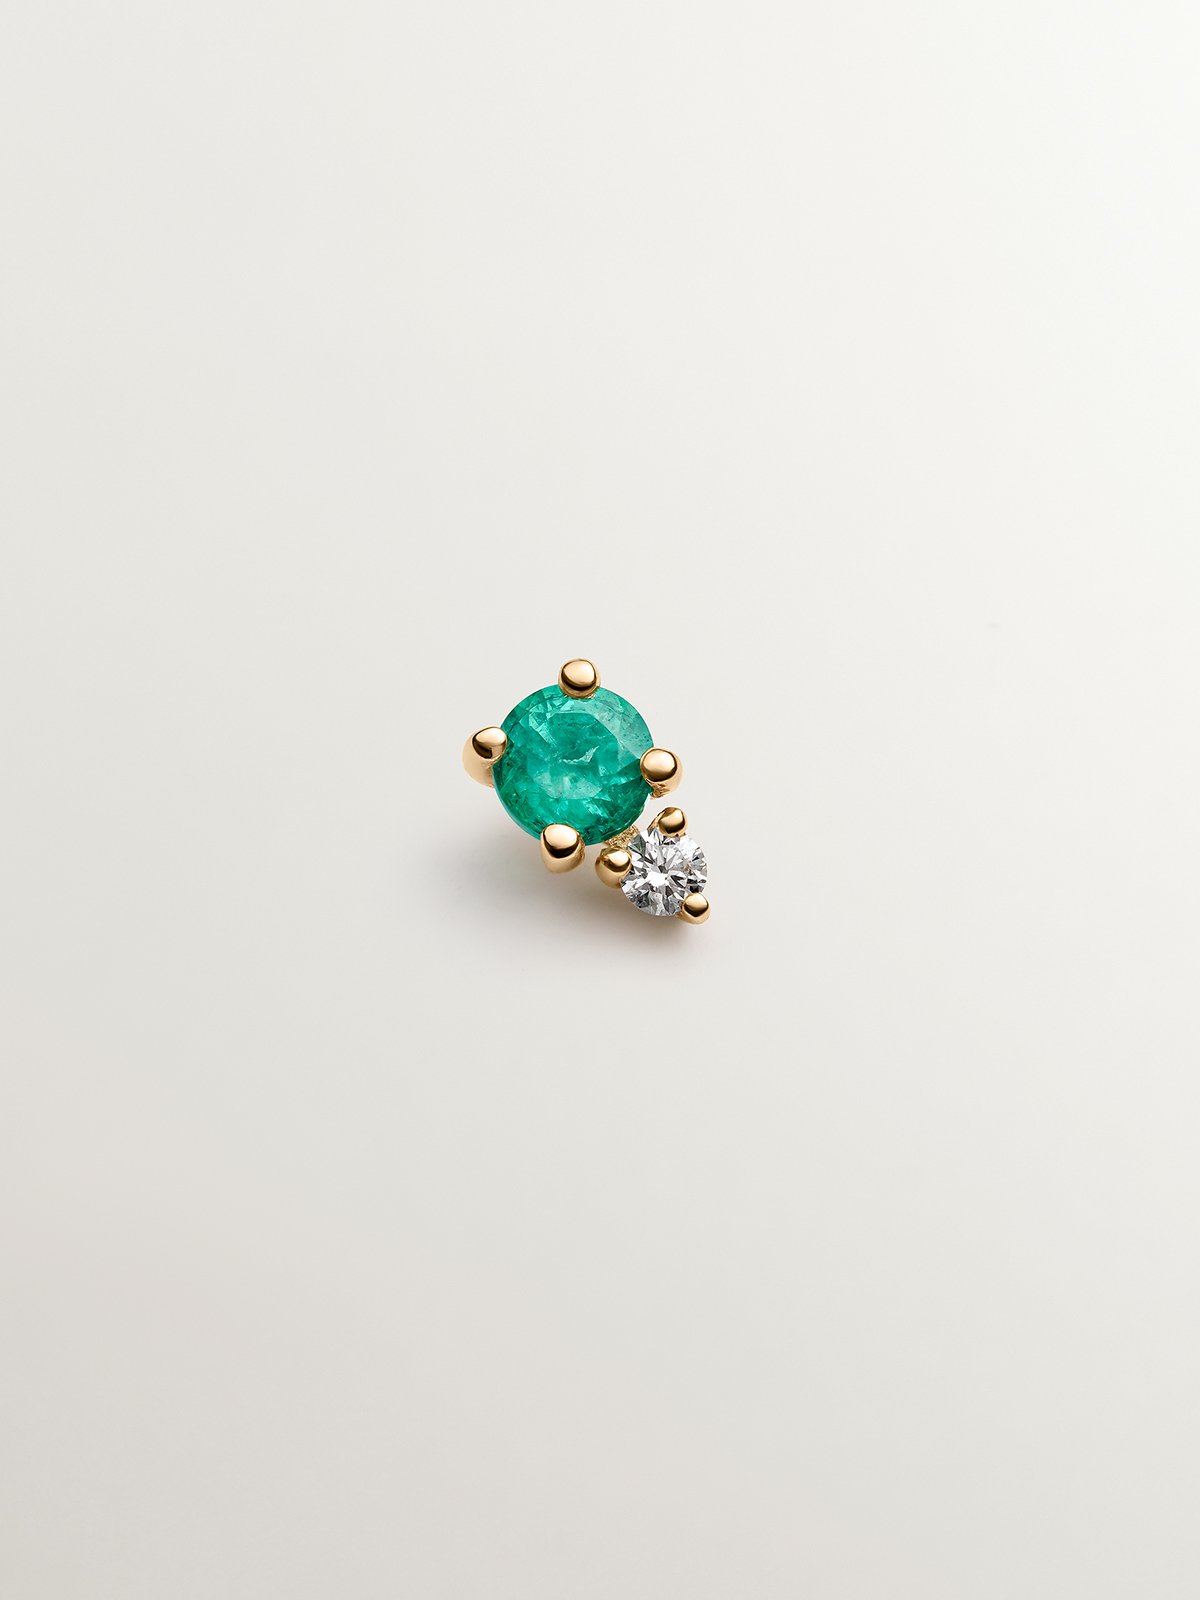 Individual 9K yellow gold earring with emerald and diamond.